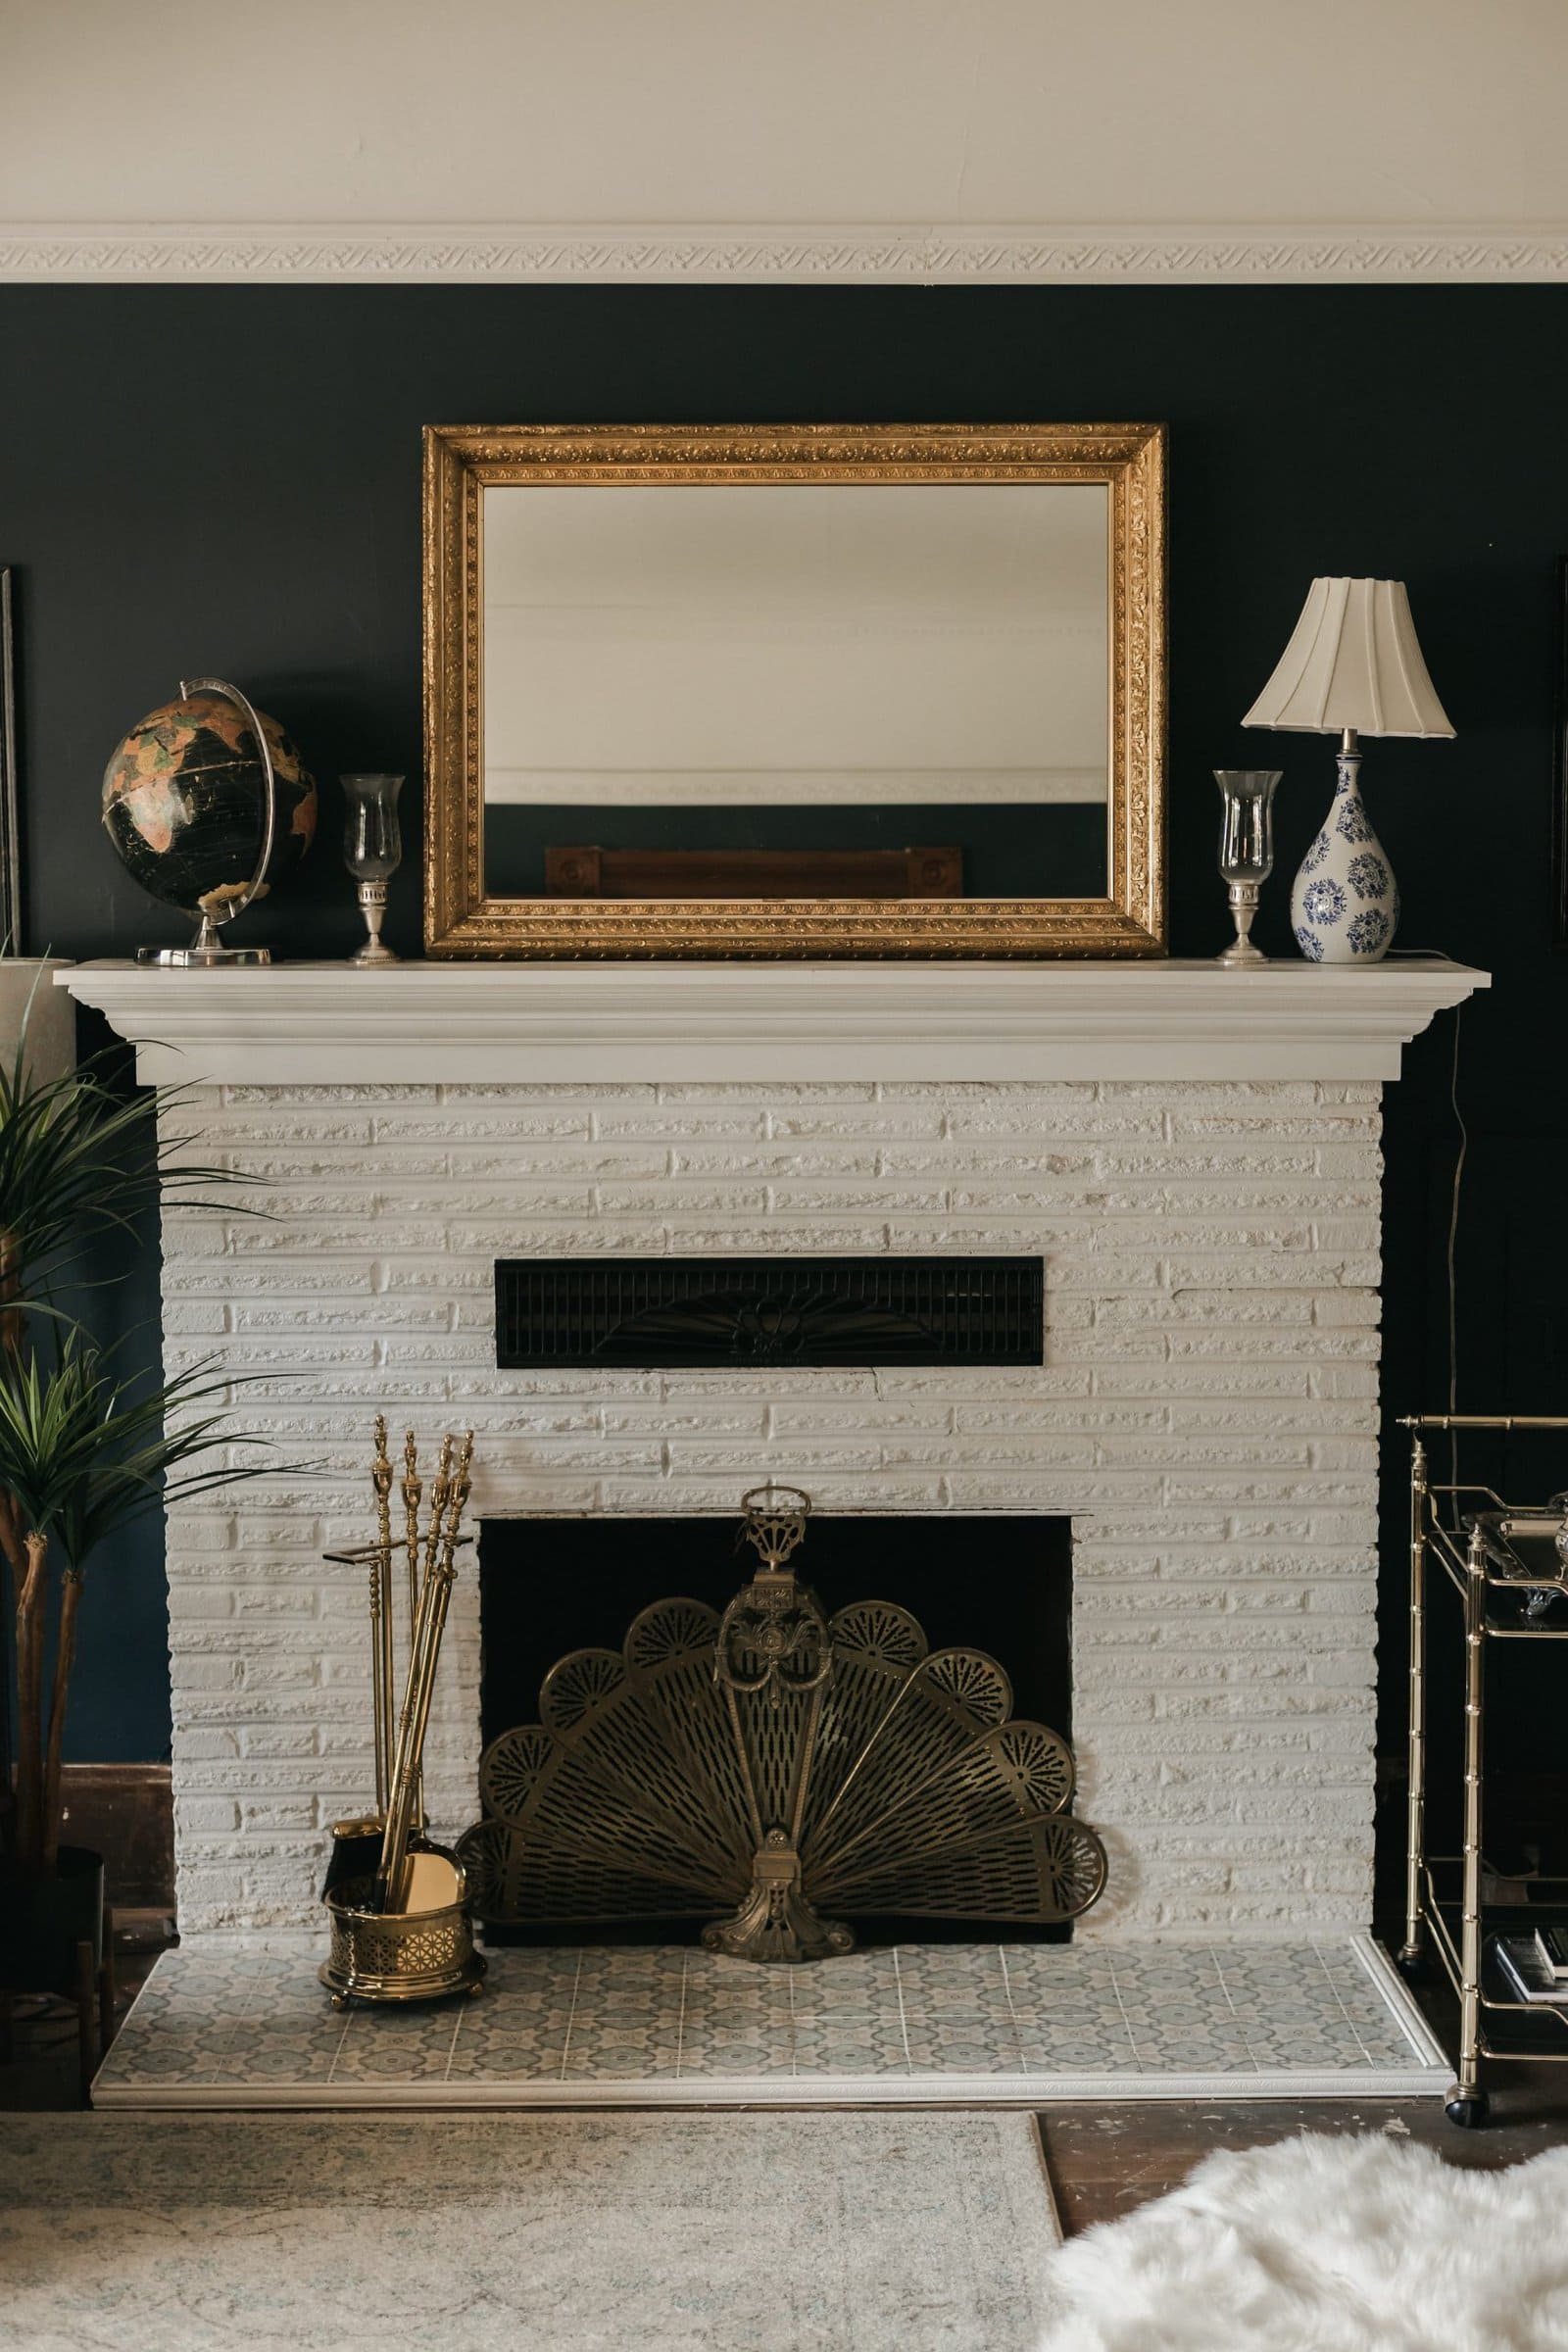  fireplace with screen scaled